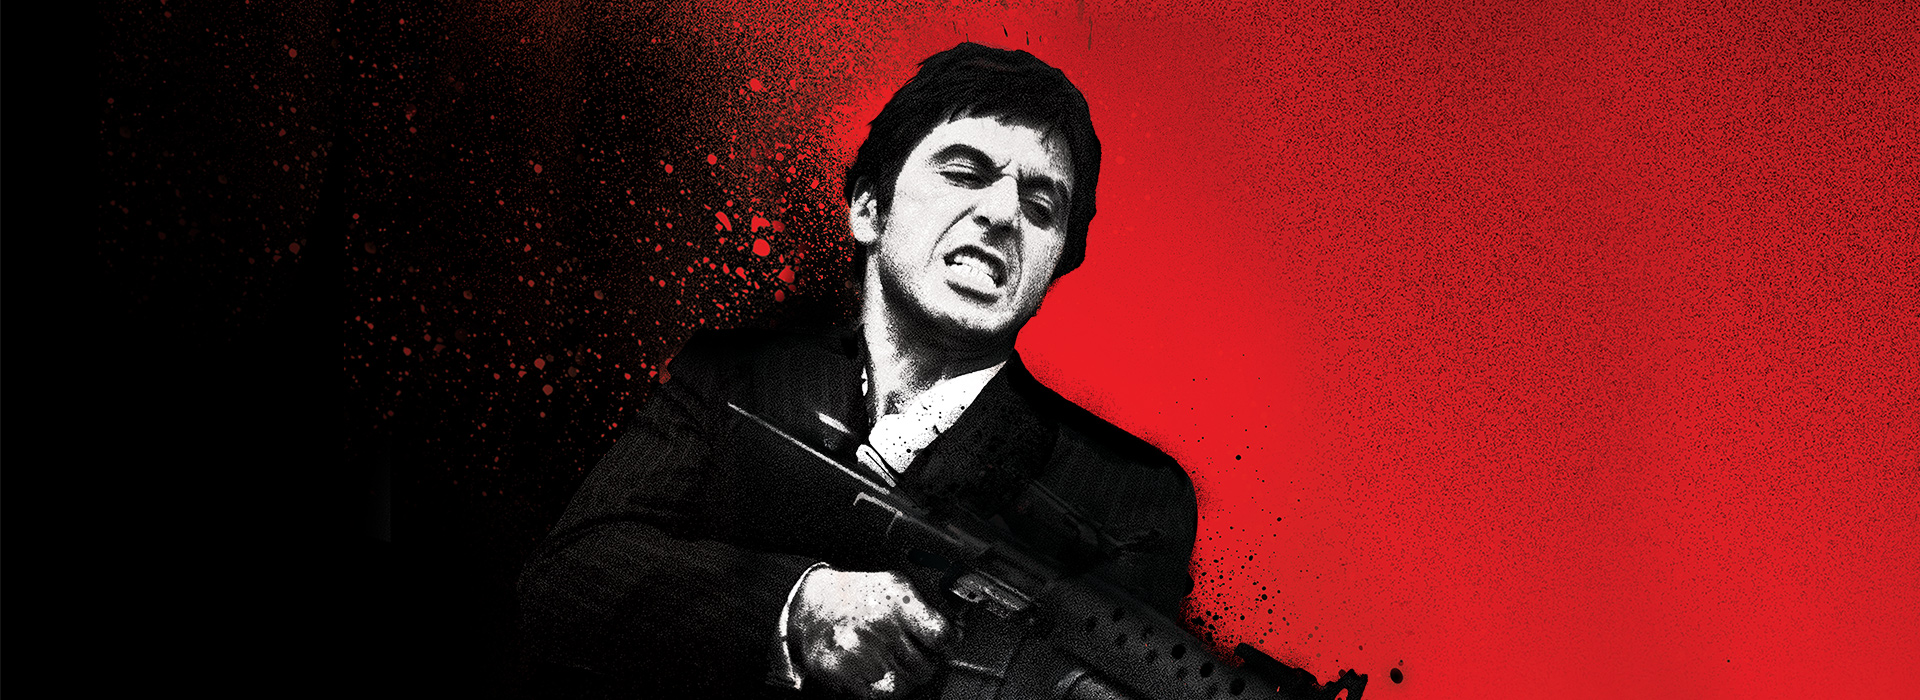 Movie poster Scarface